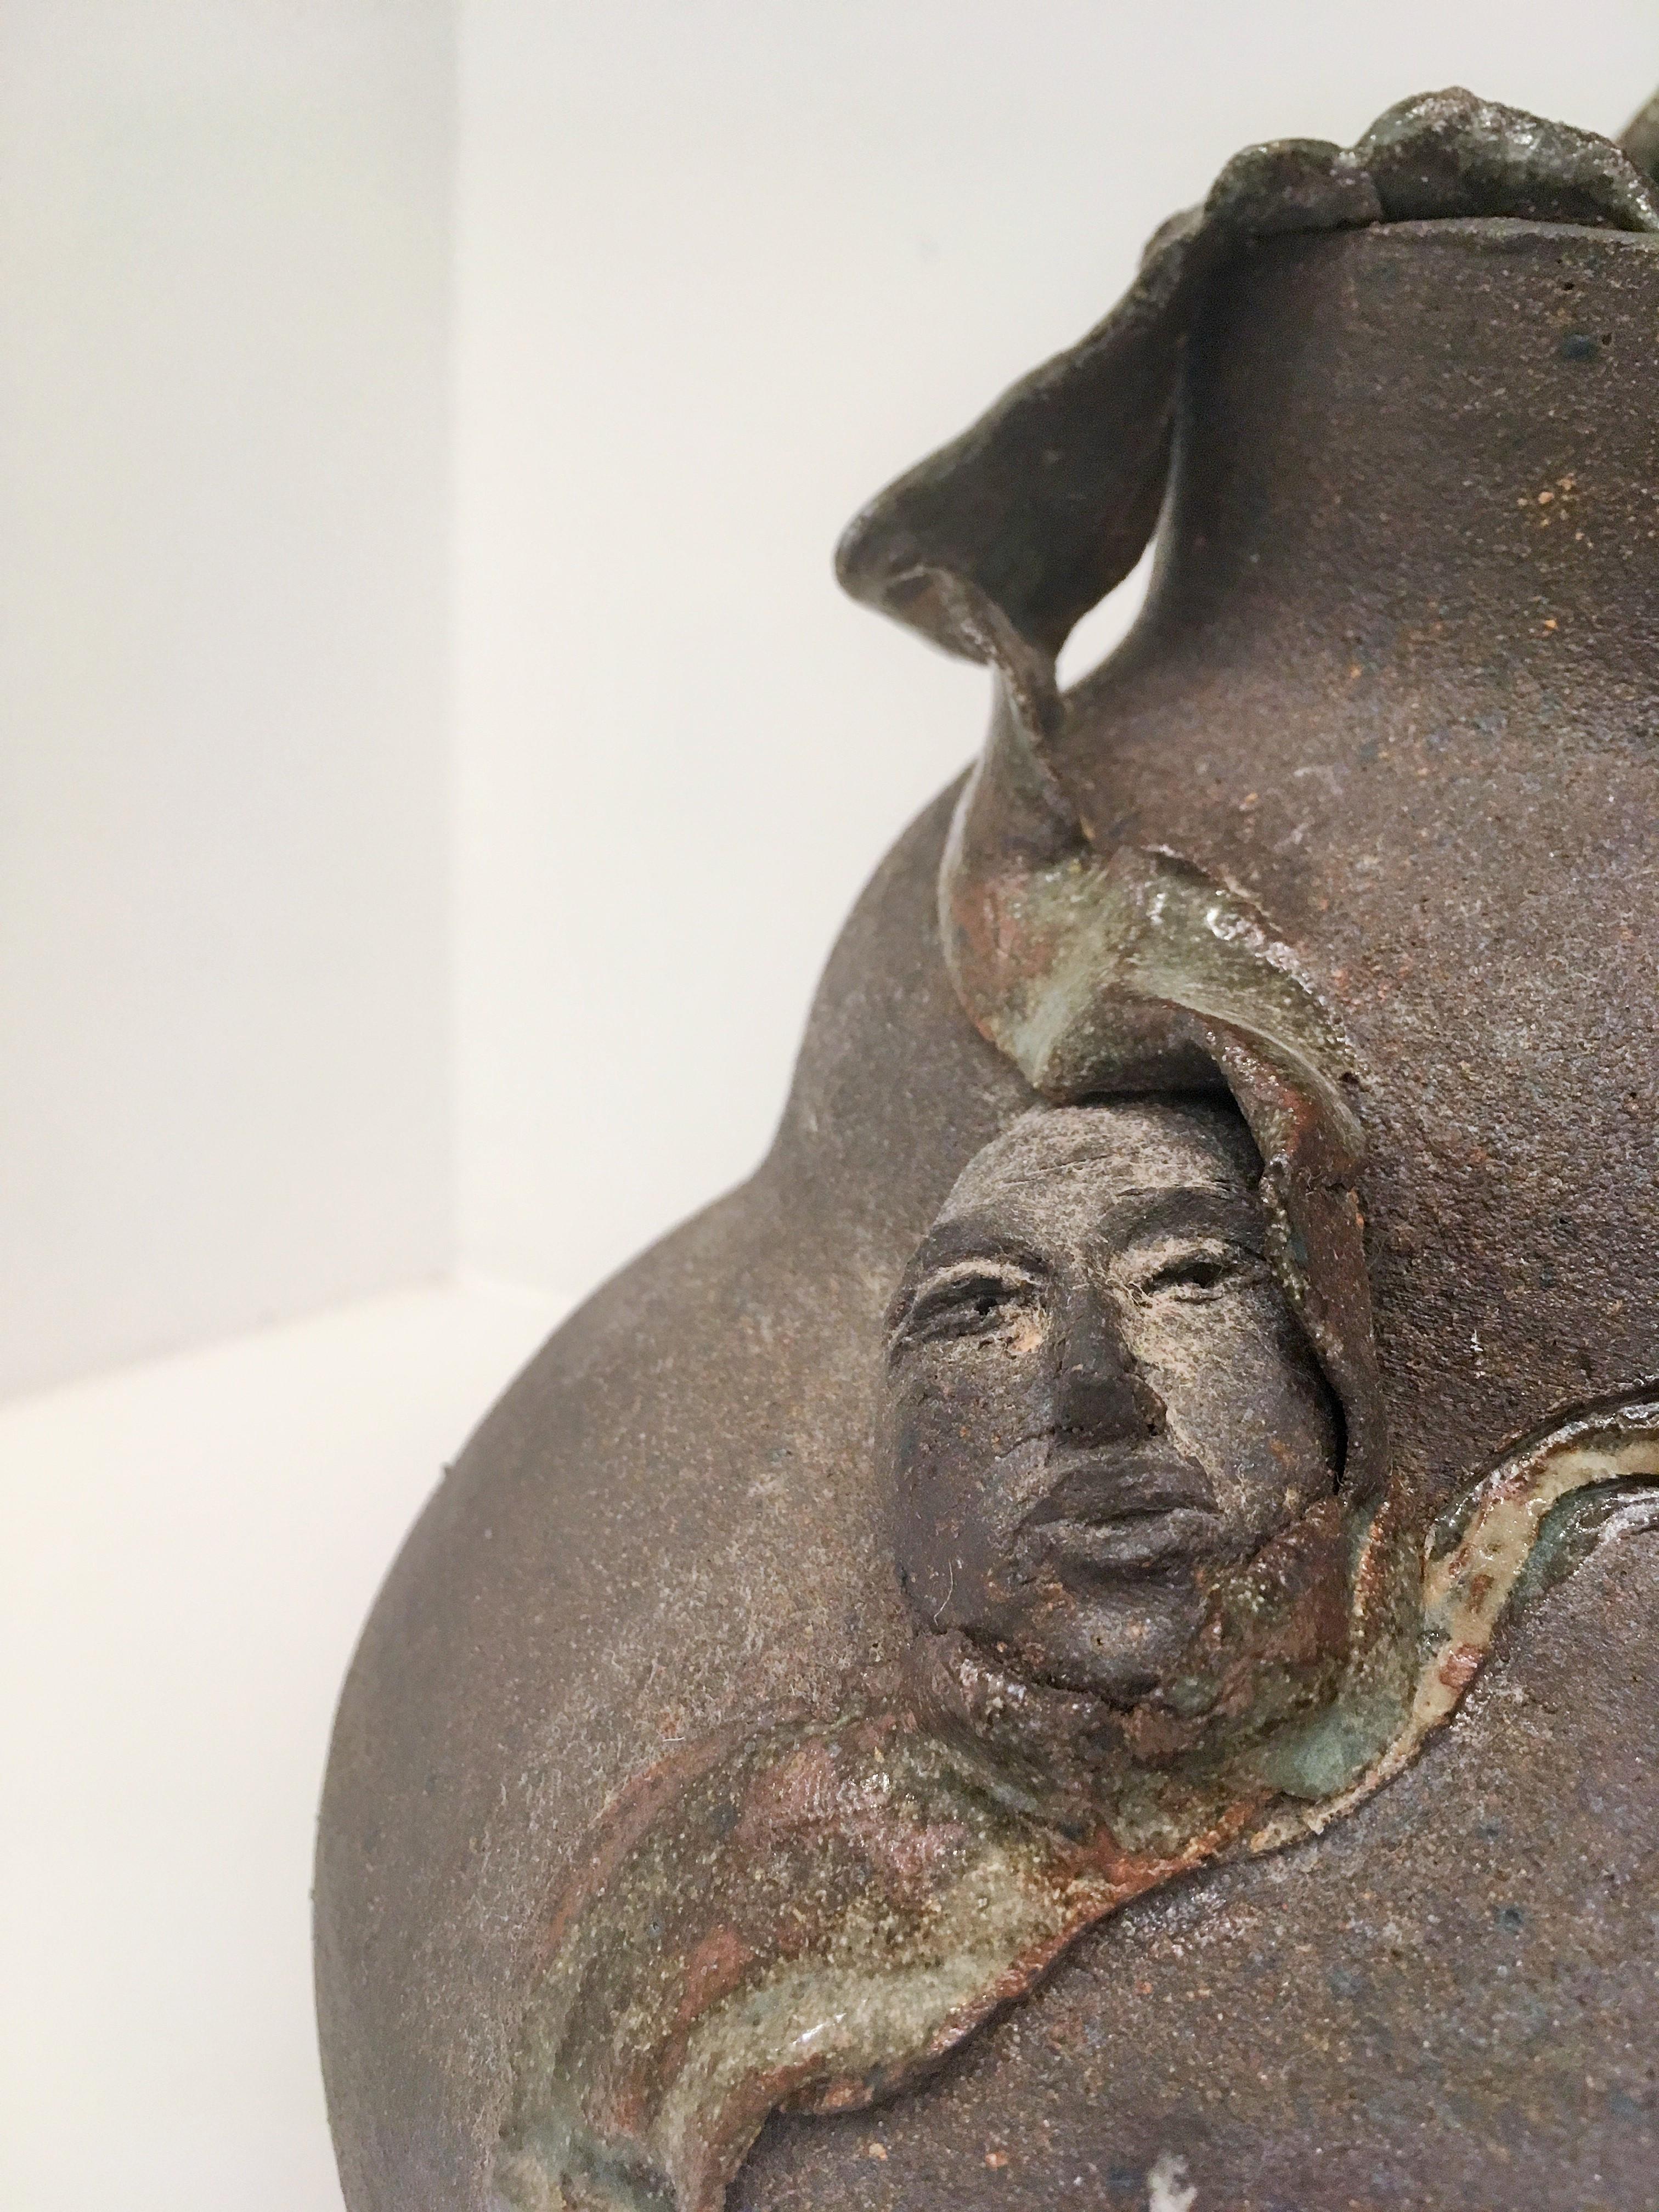 Contemporary clay vessel, with brownish-green glaze. A figure enveloped in clay takes center stage. Signed.